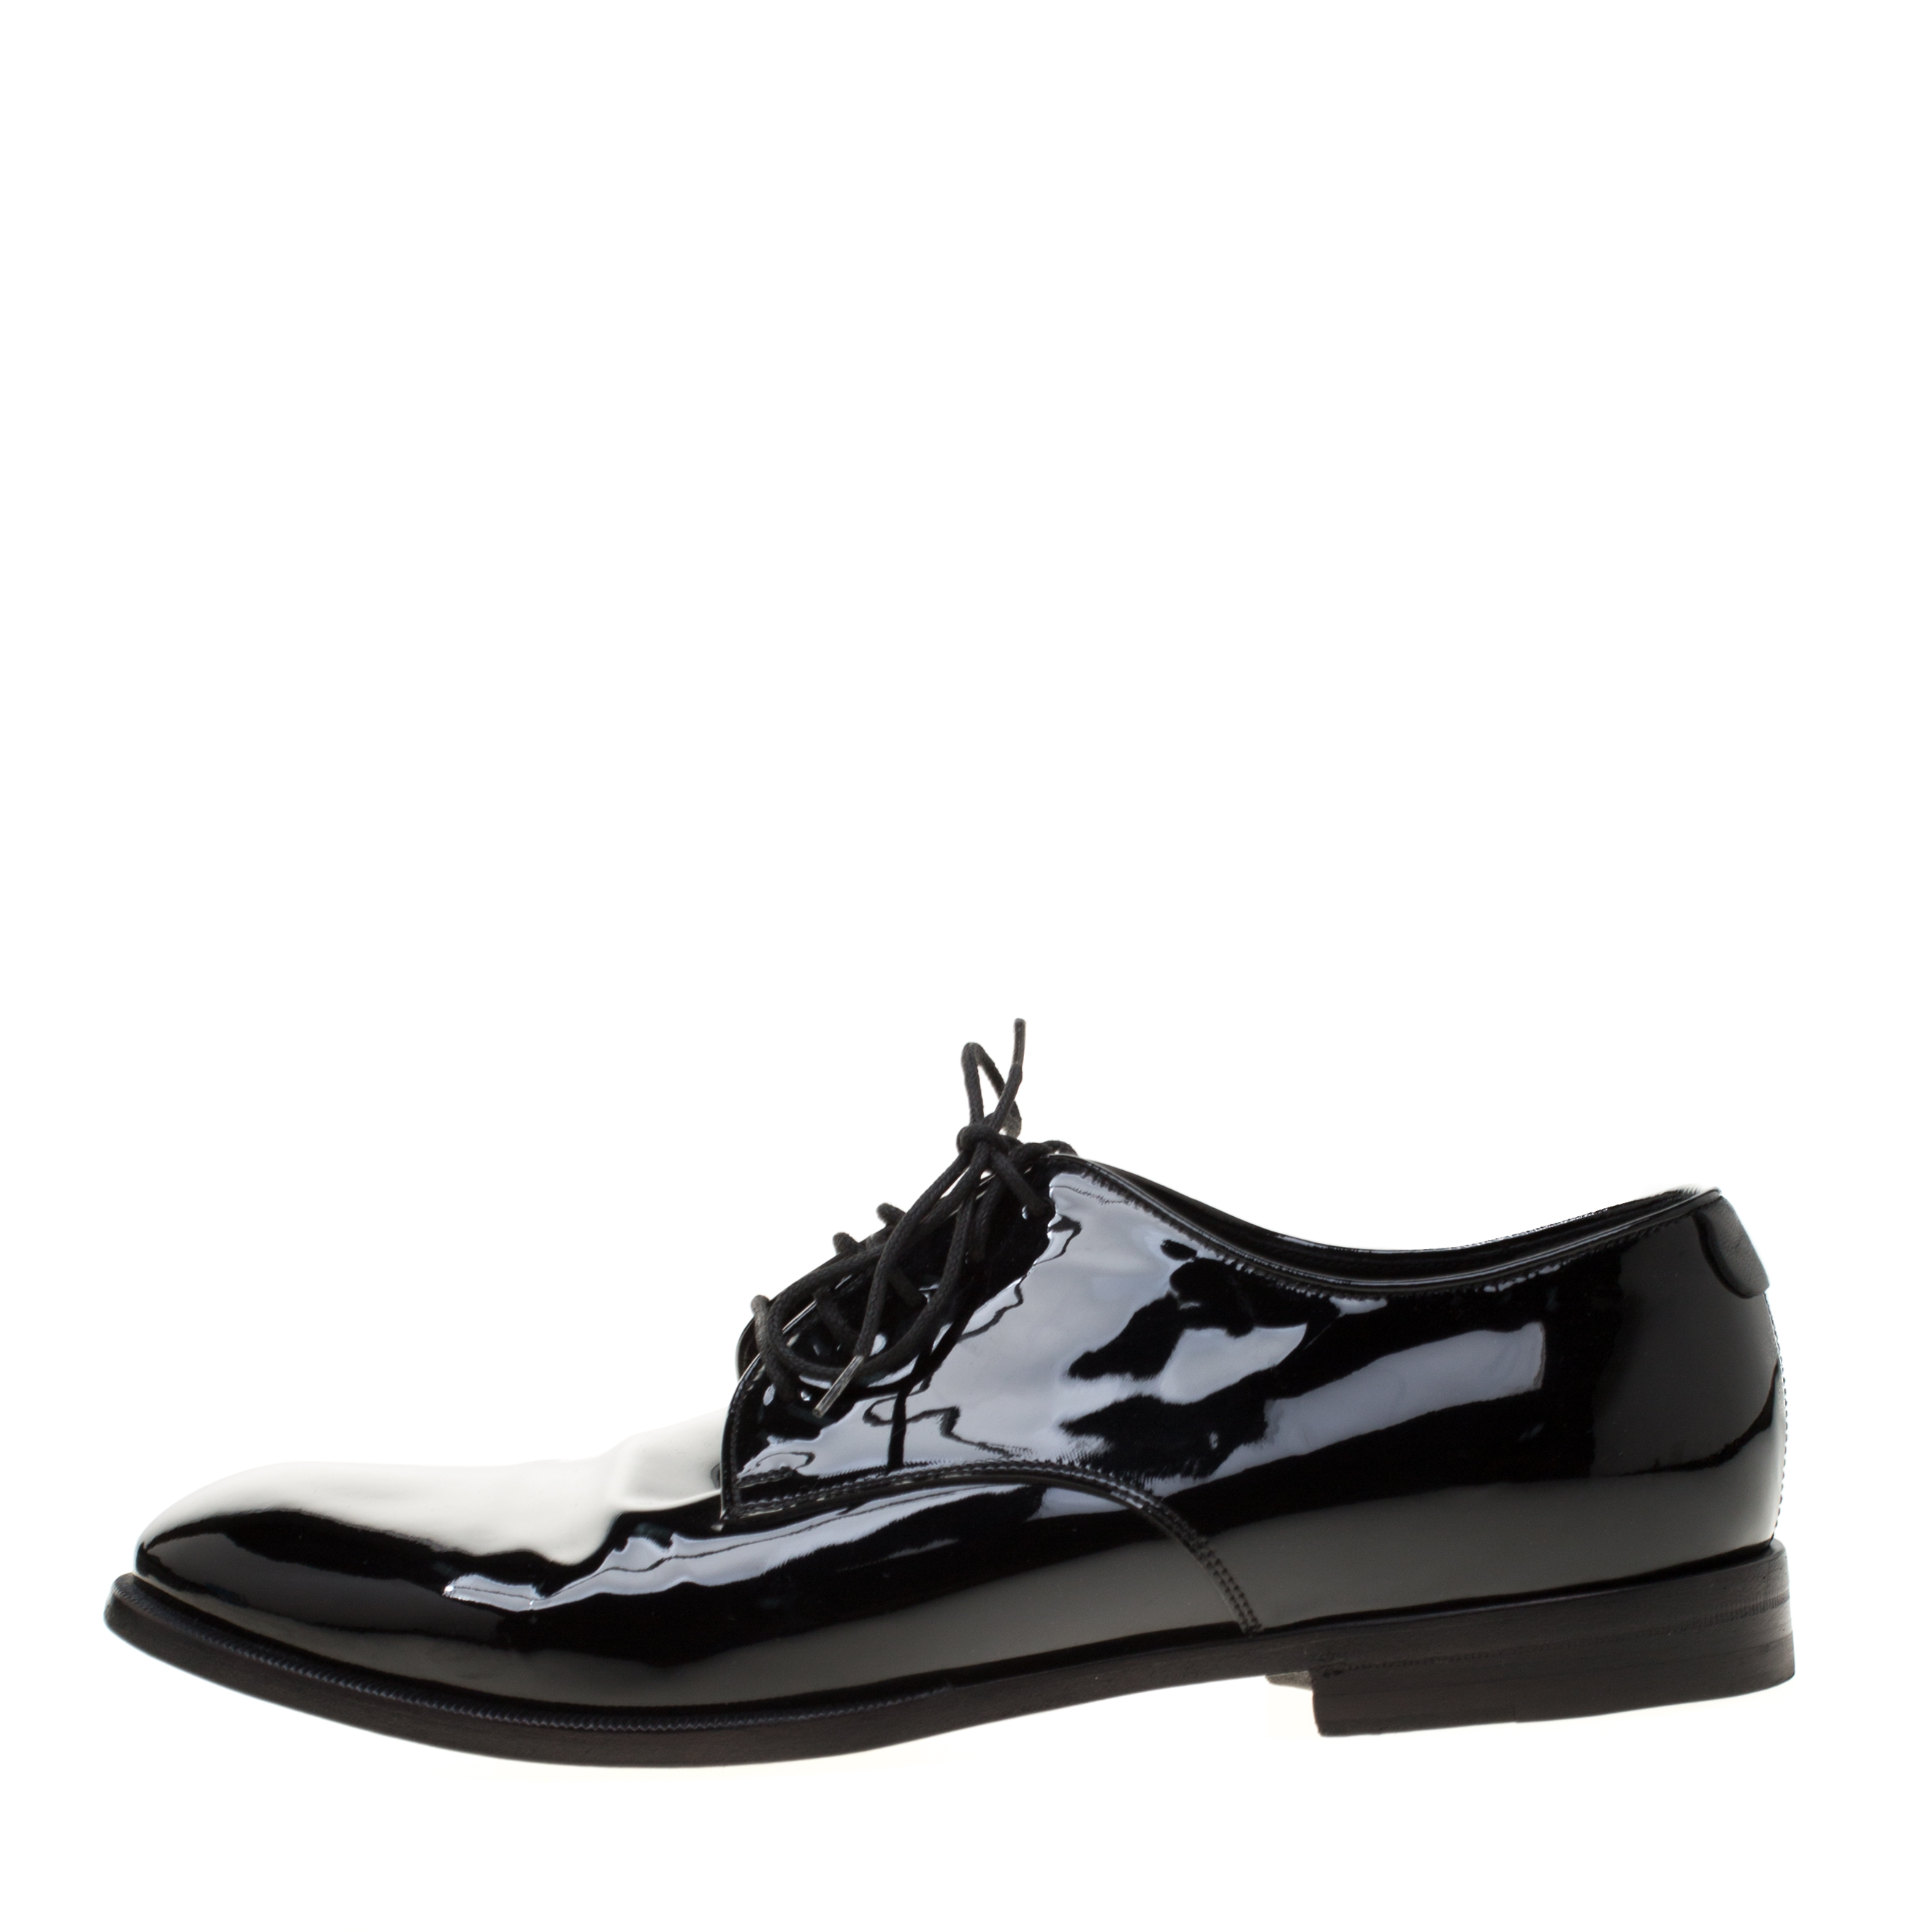 Gucci Black Patent Leather Lace Up Derby Size 41.5